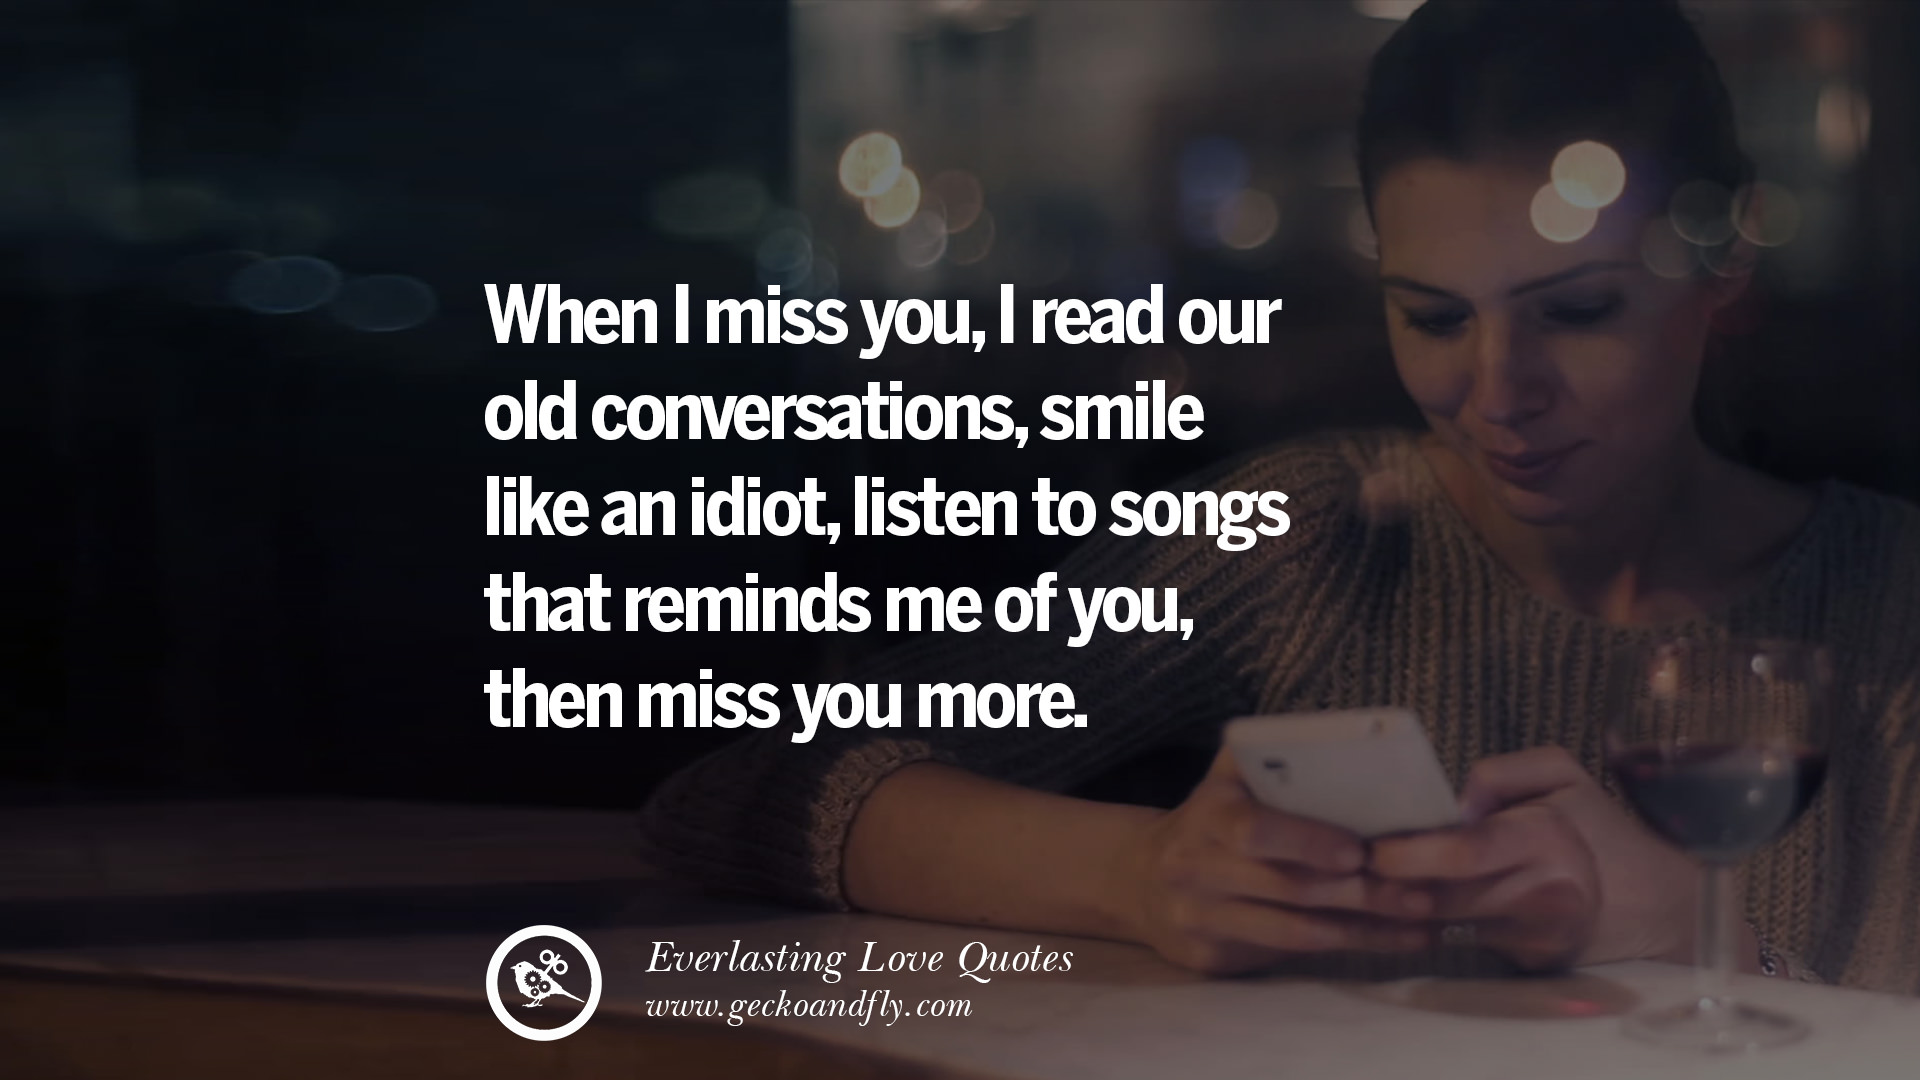 18 Romantic Love Quotes For Him and Her on Valentine Day
 Quotes About Missing Her Smile